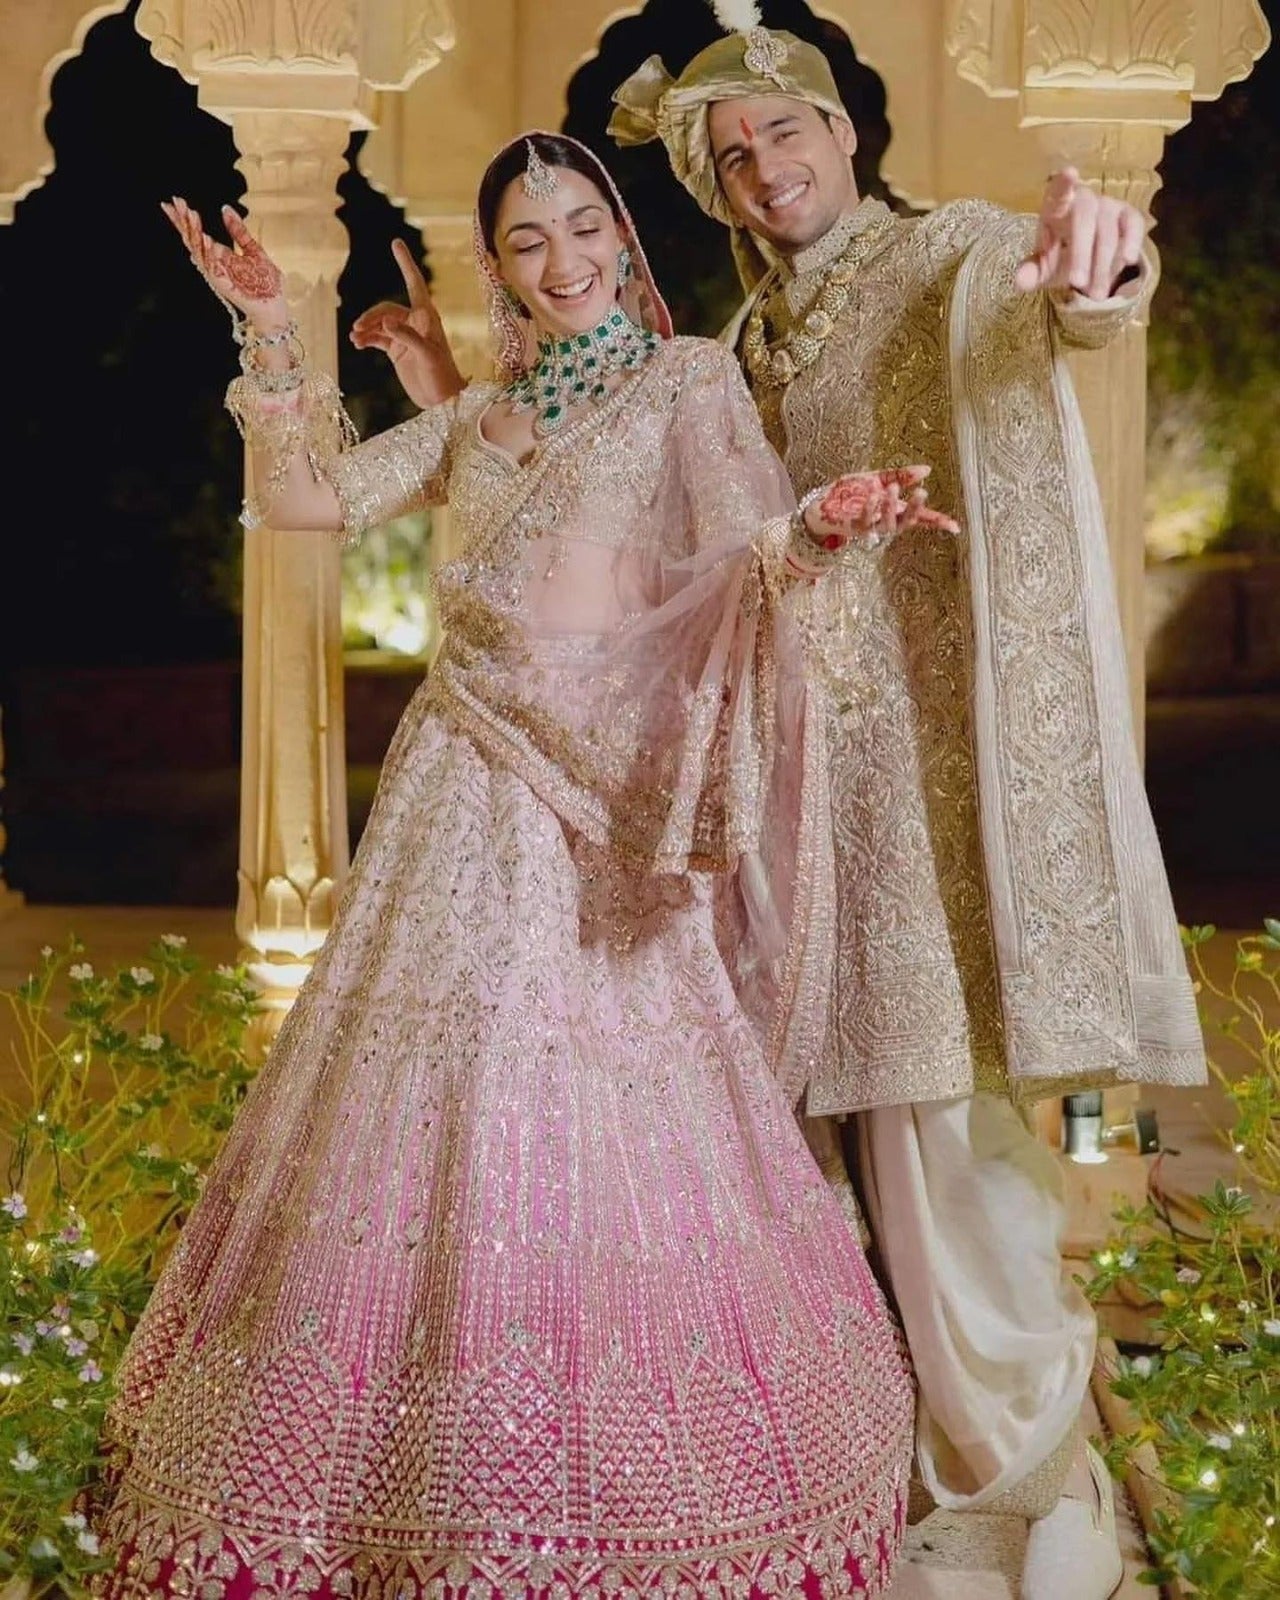 Confused How To Drape 'Double Dupatta'? Check Out 6 Unique 'Dupatta'  Draping Styles By Real Brides